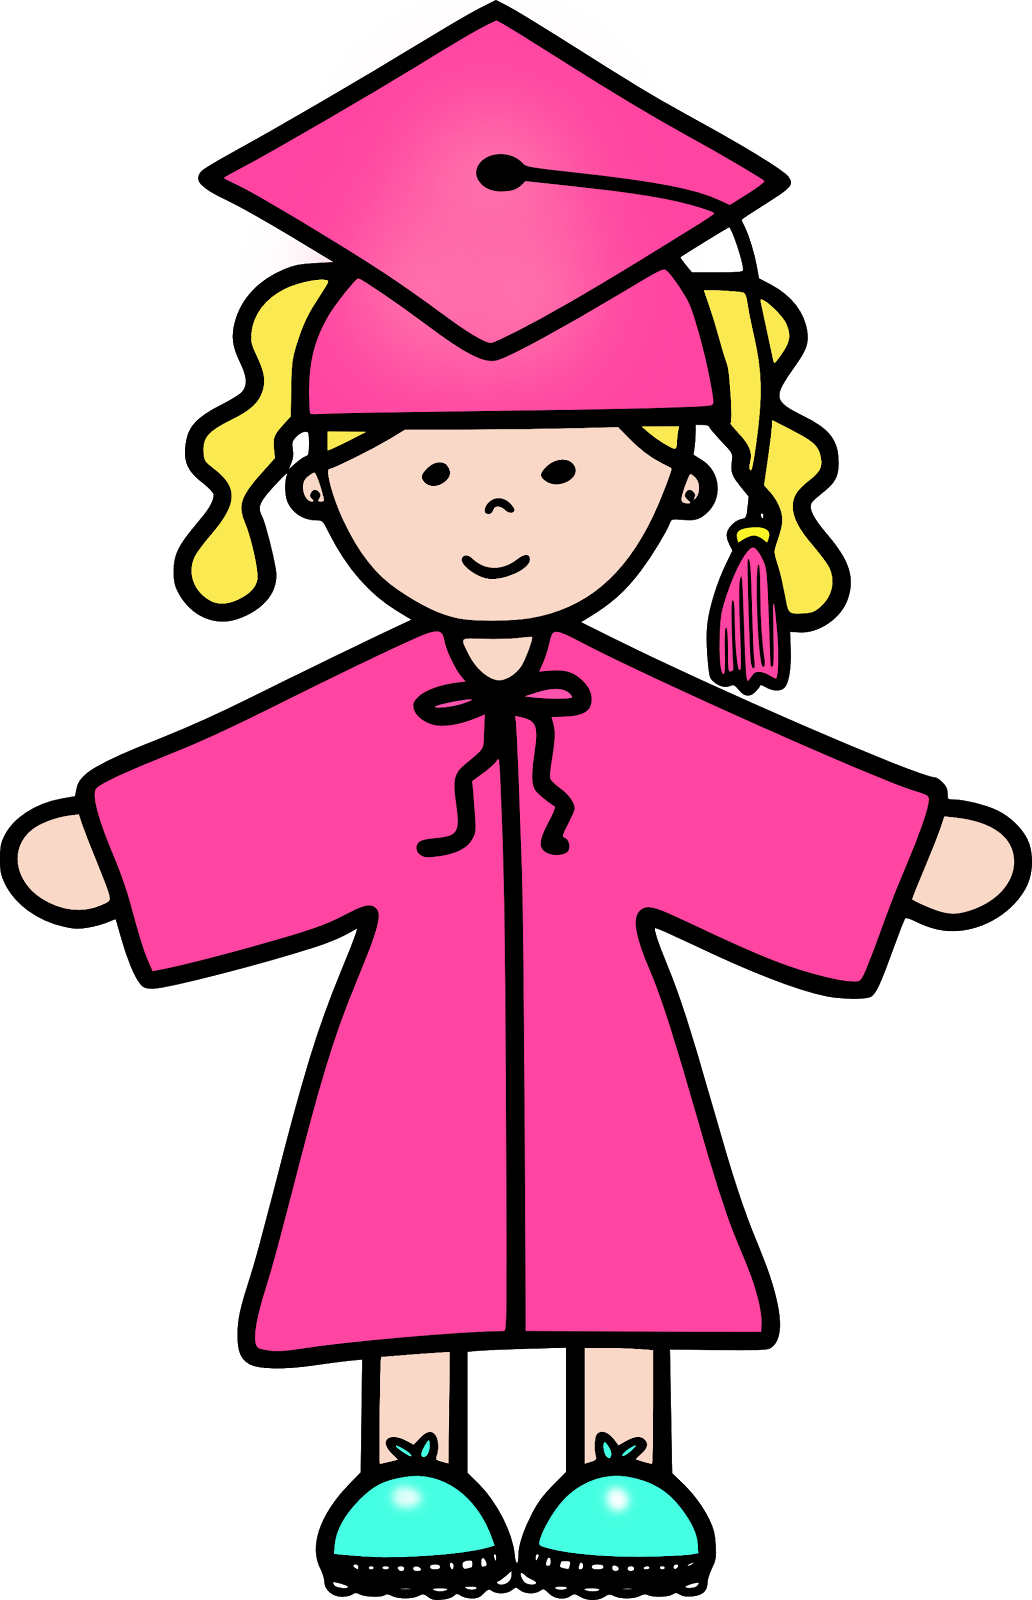 Graduation Cap And Gown Clipart | Free Download Clip Art | Free ...